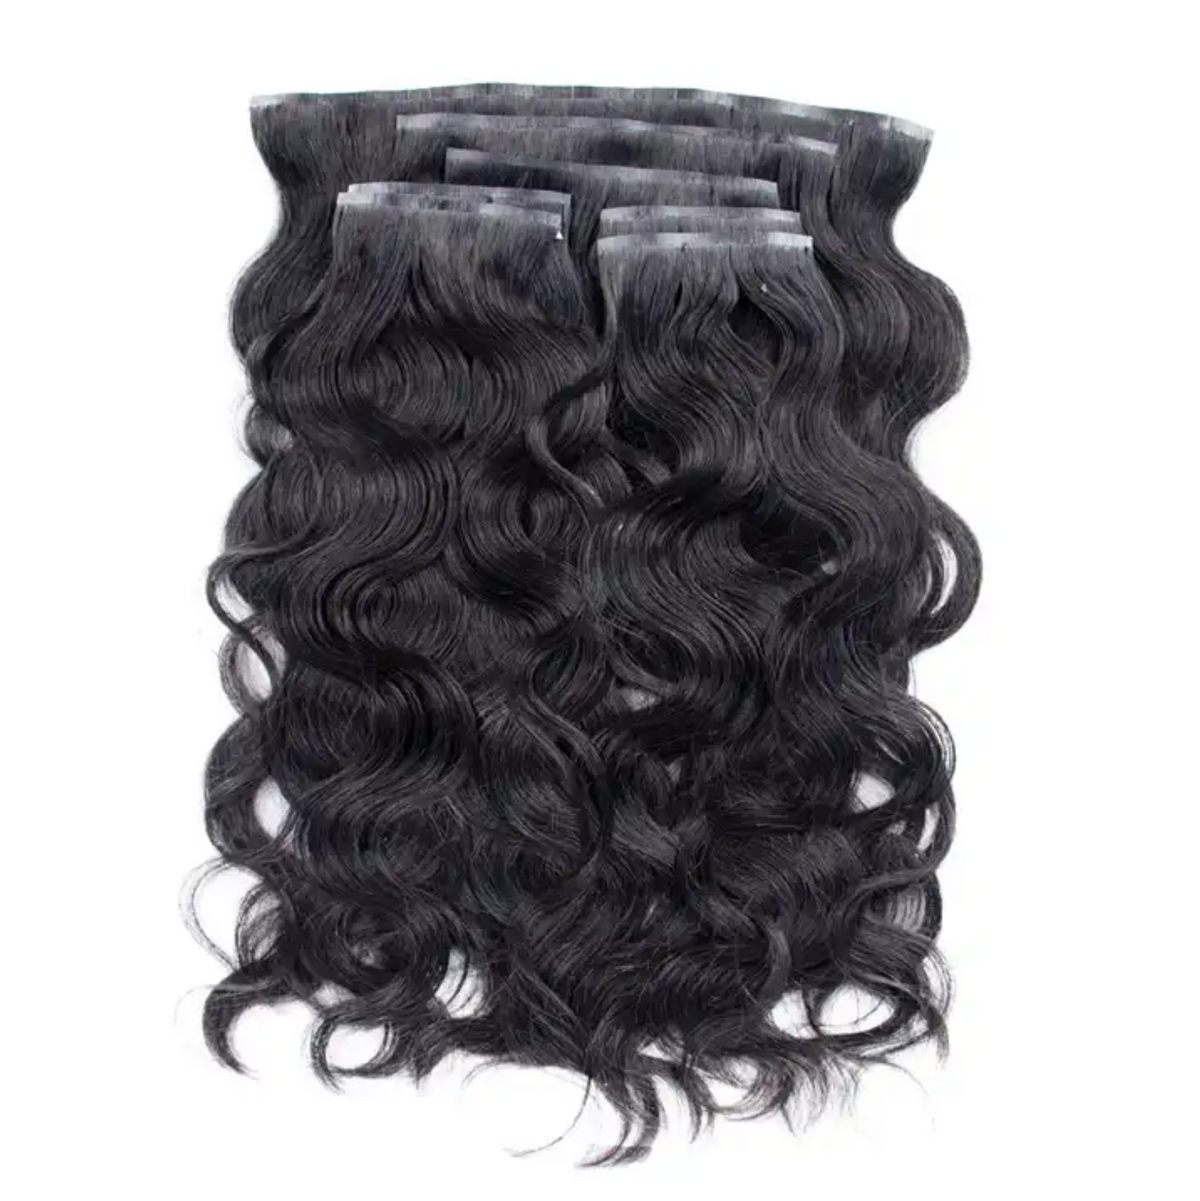 Acai Vietnamese Body Wave Seamless Clip Ins | Hypoallergenic - Allergy Friendly - Naturally Free